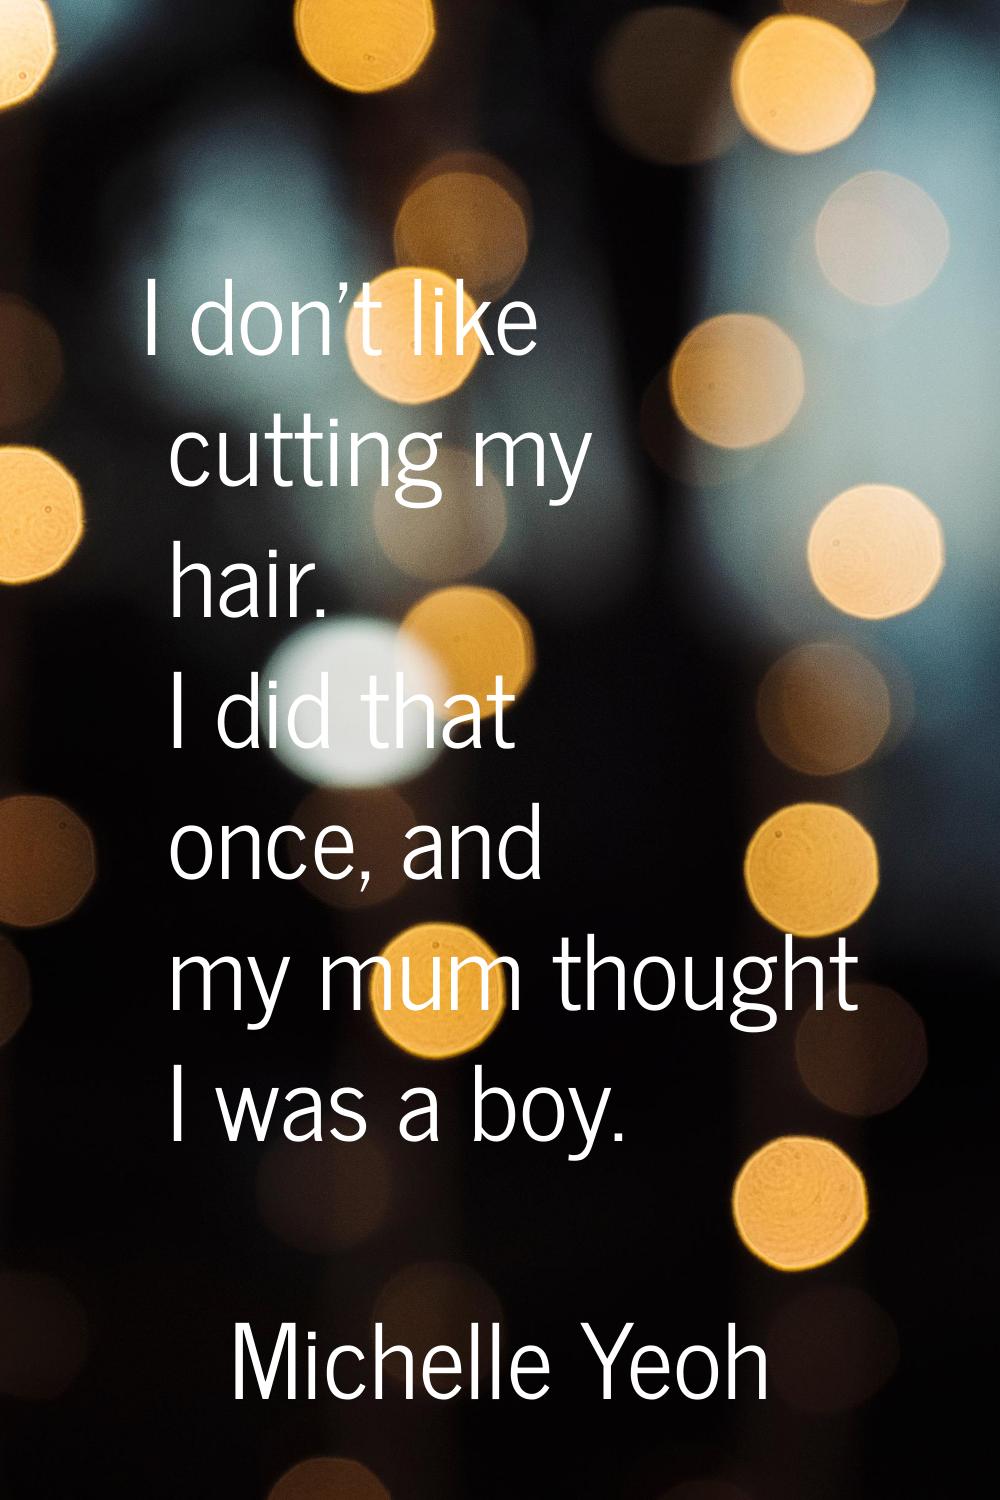 I don't like cutting my hair. I did that once, and my mum thought I was a boy.